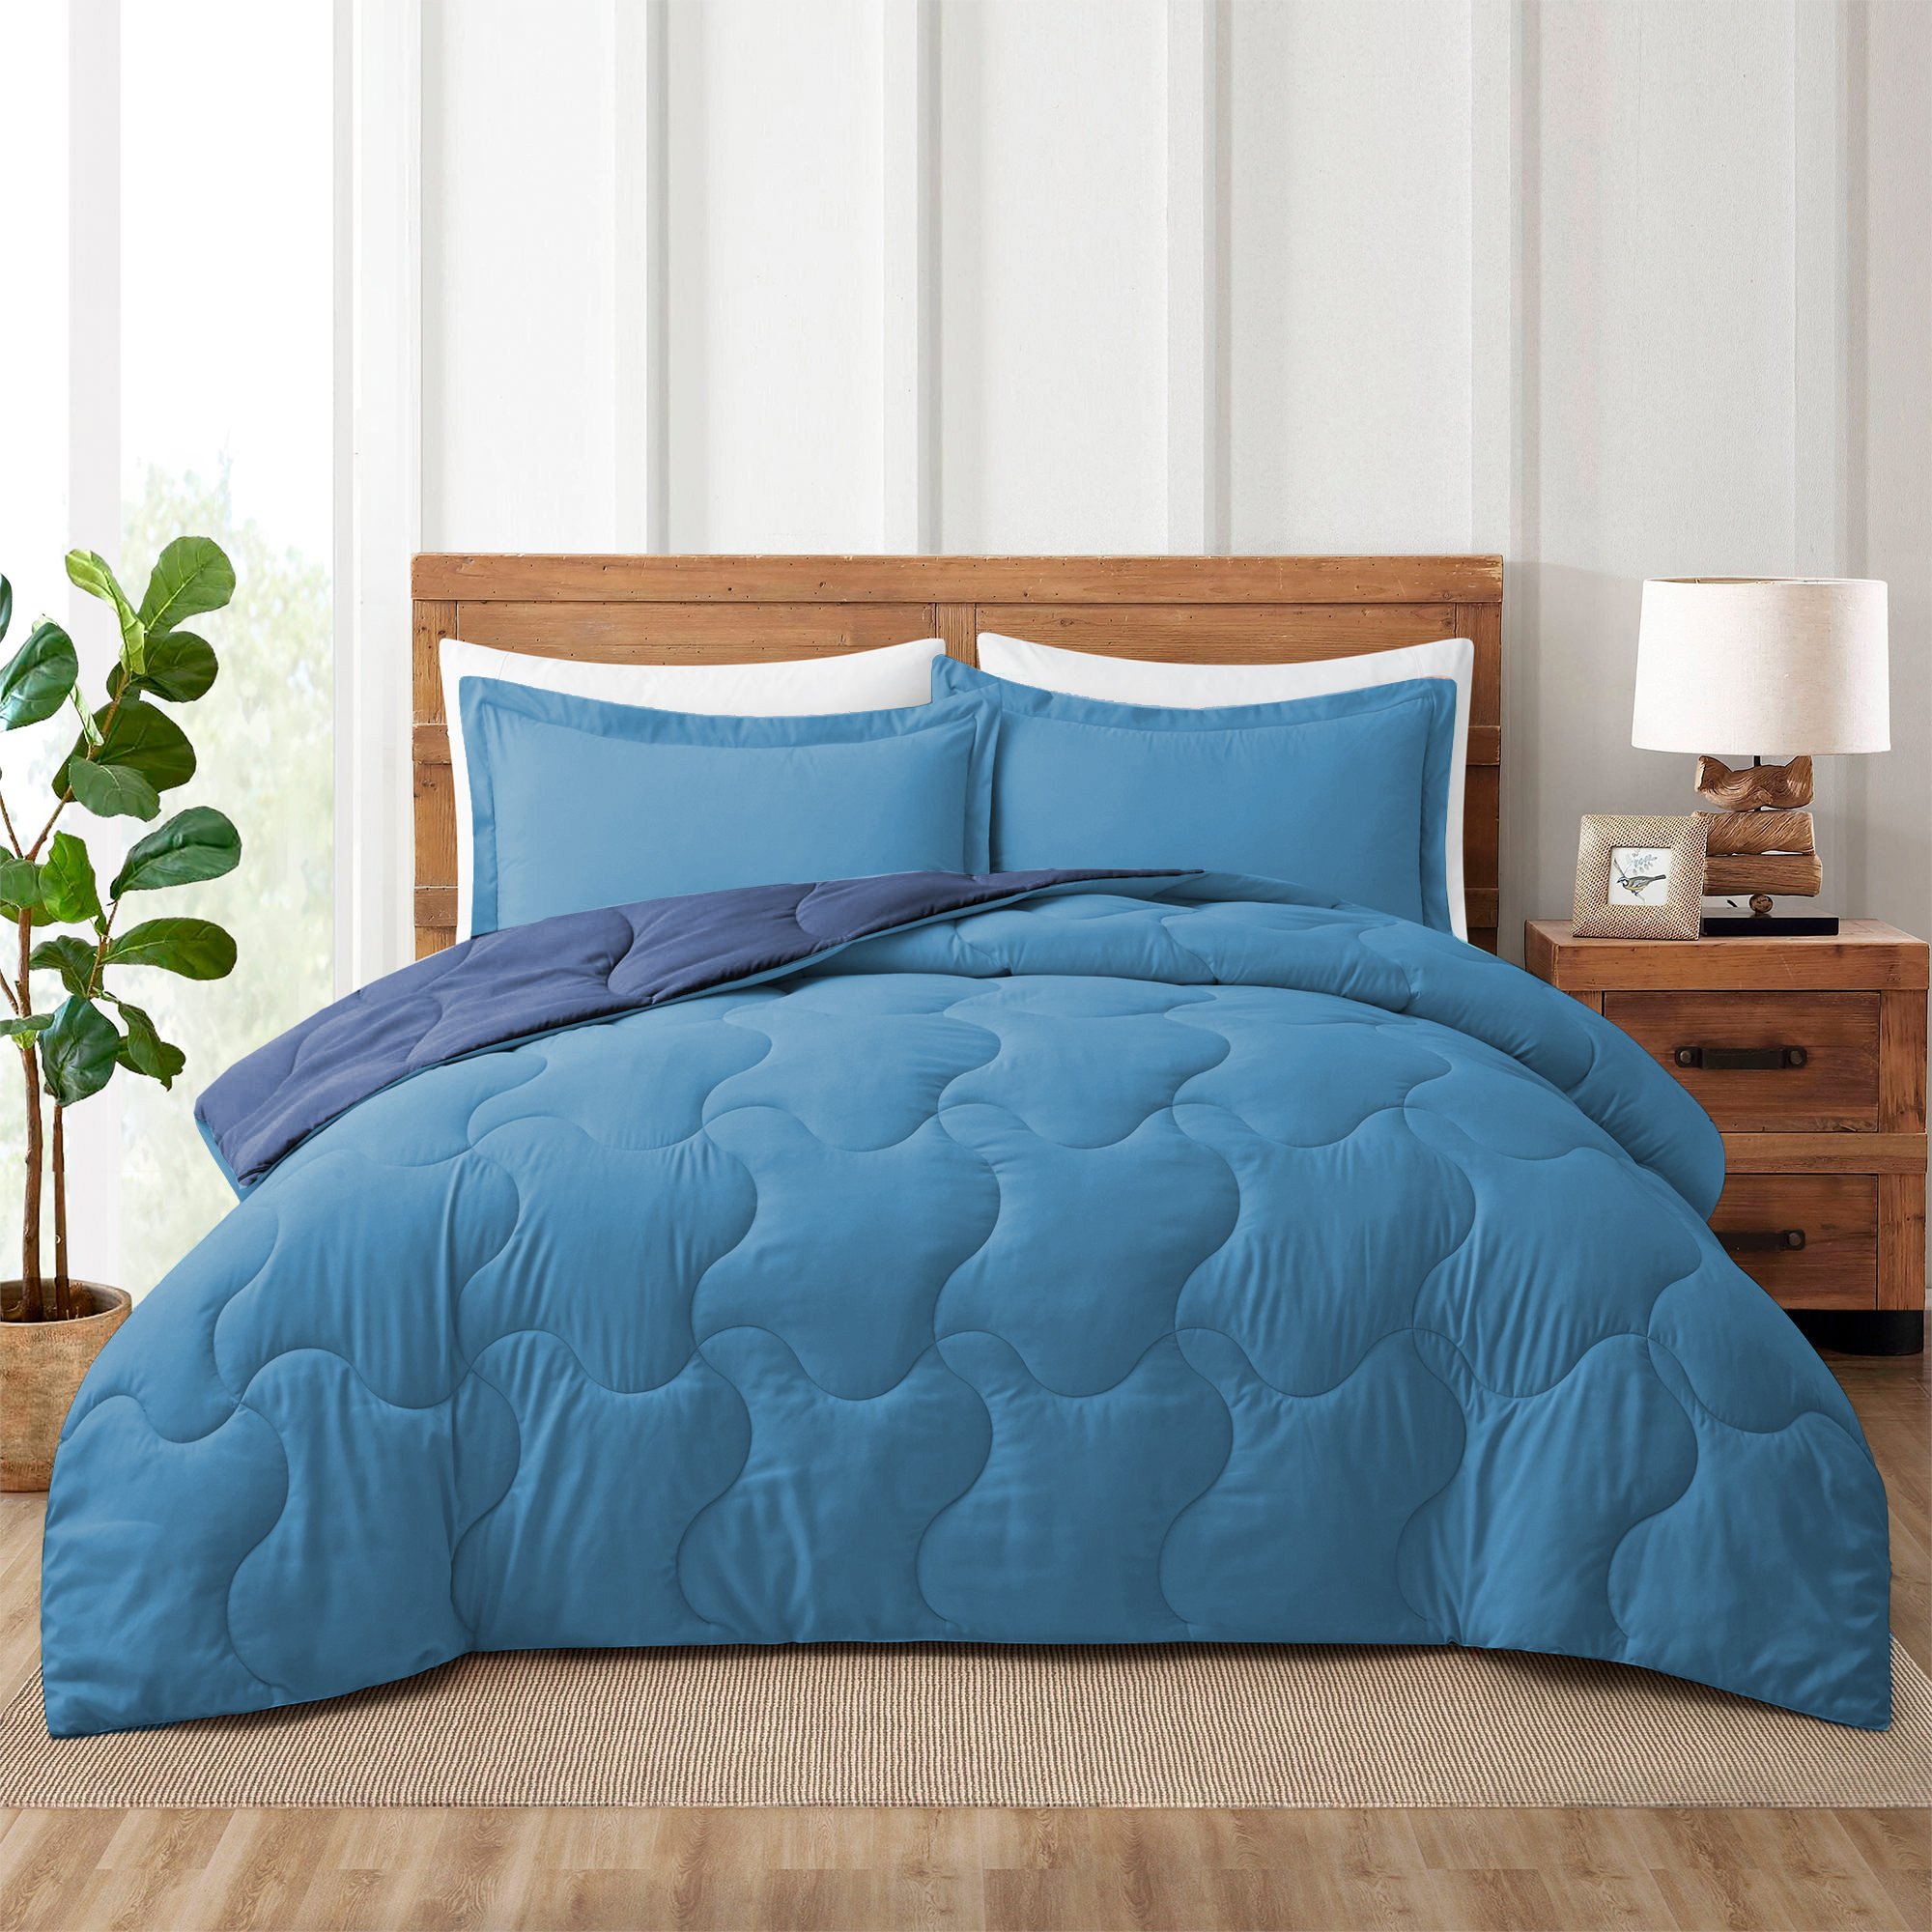 Lightweight Soft Quilted Down Alternative Comforter Reversible Duvet Insert With Corner Tabs - Twin Size